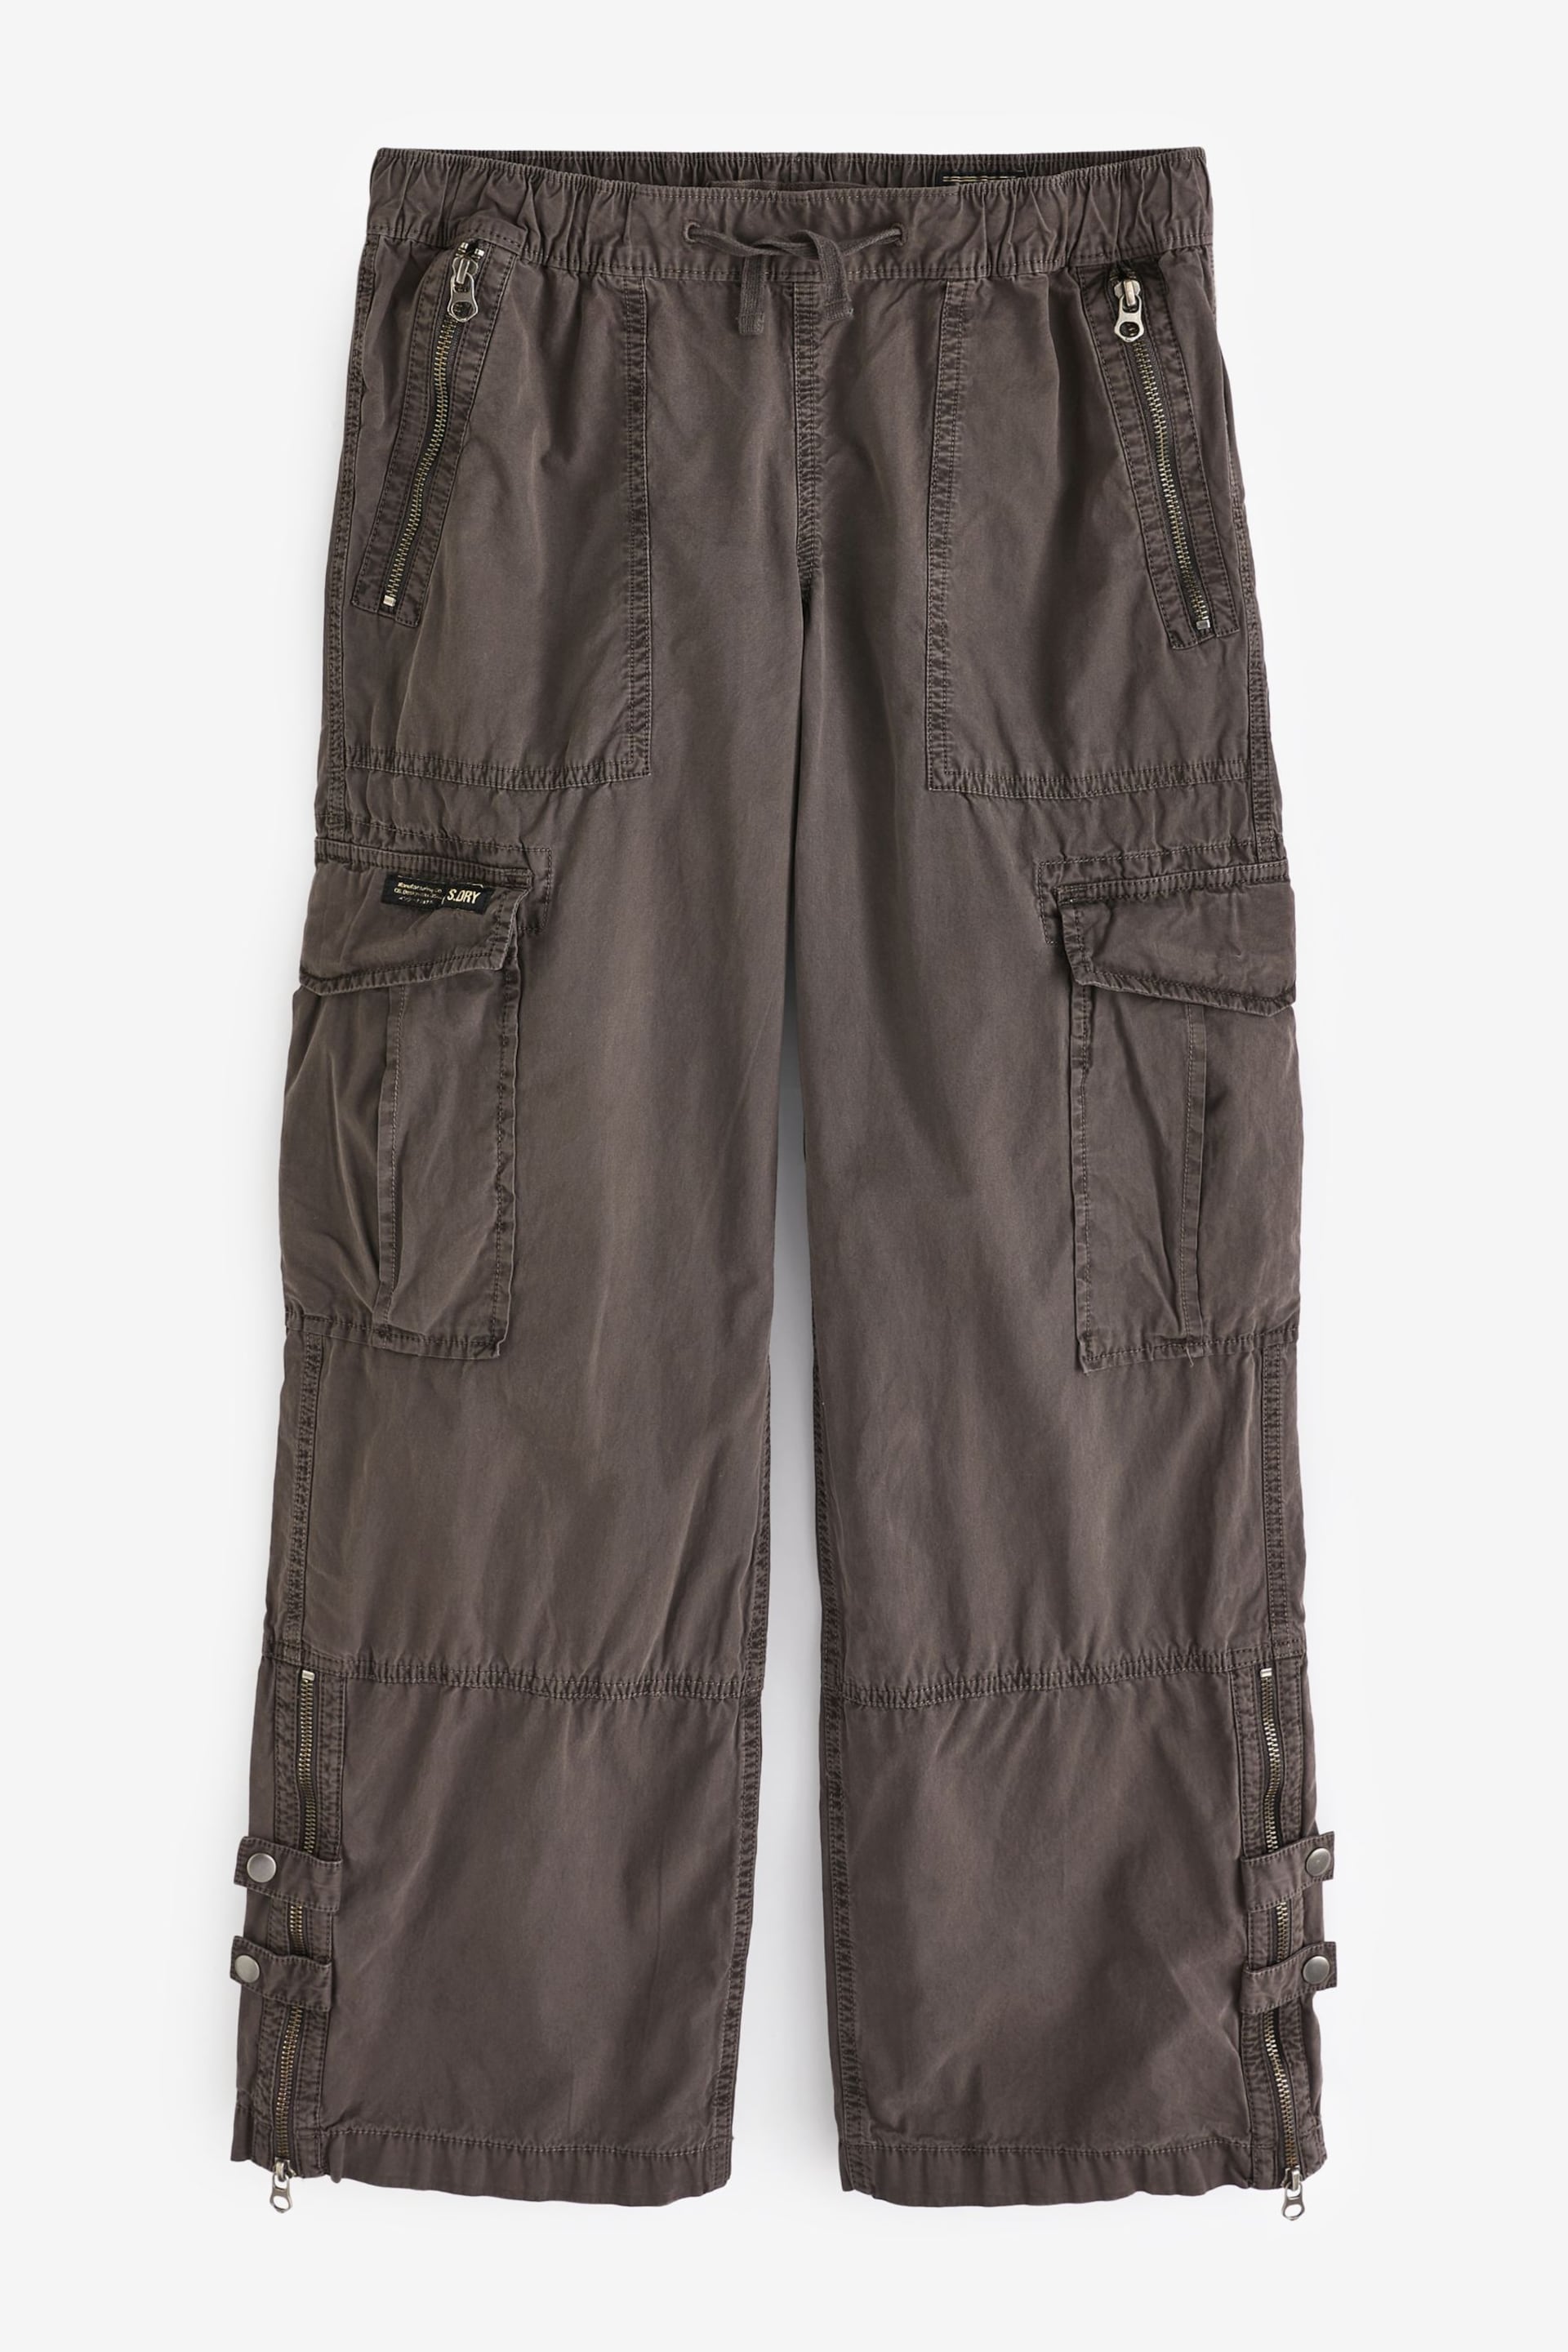 Superdry Brown Vintage Elastic Cargo Utility Trousers - Image 4 of 5